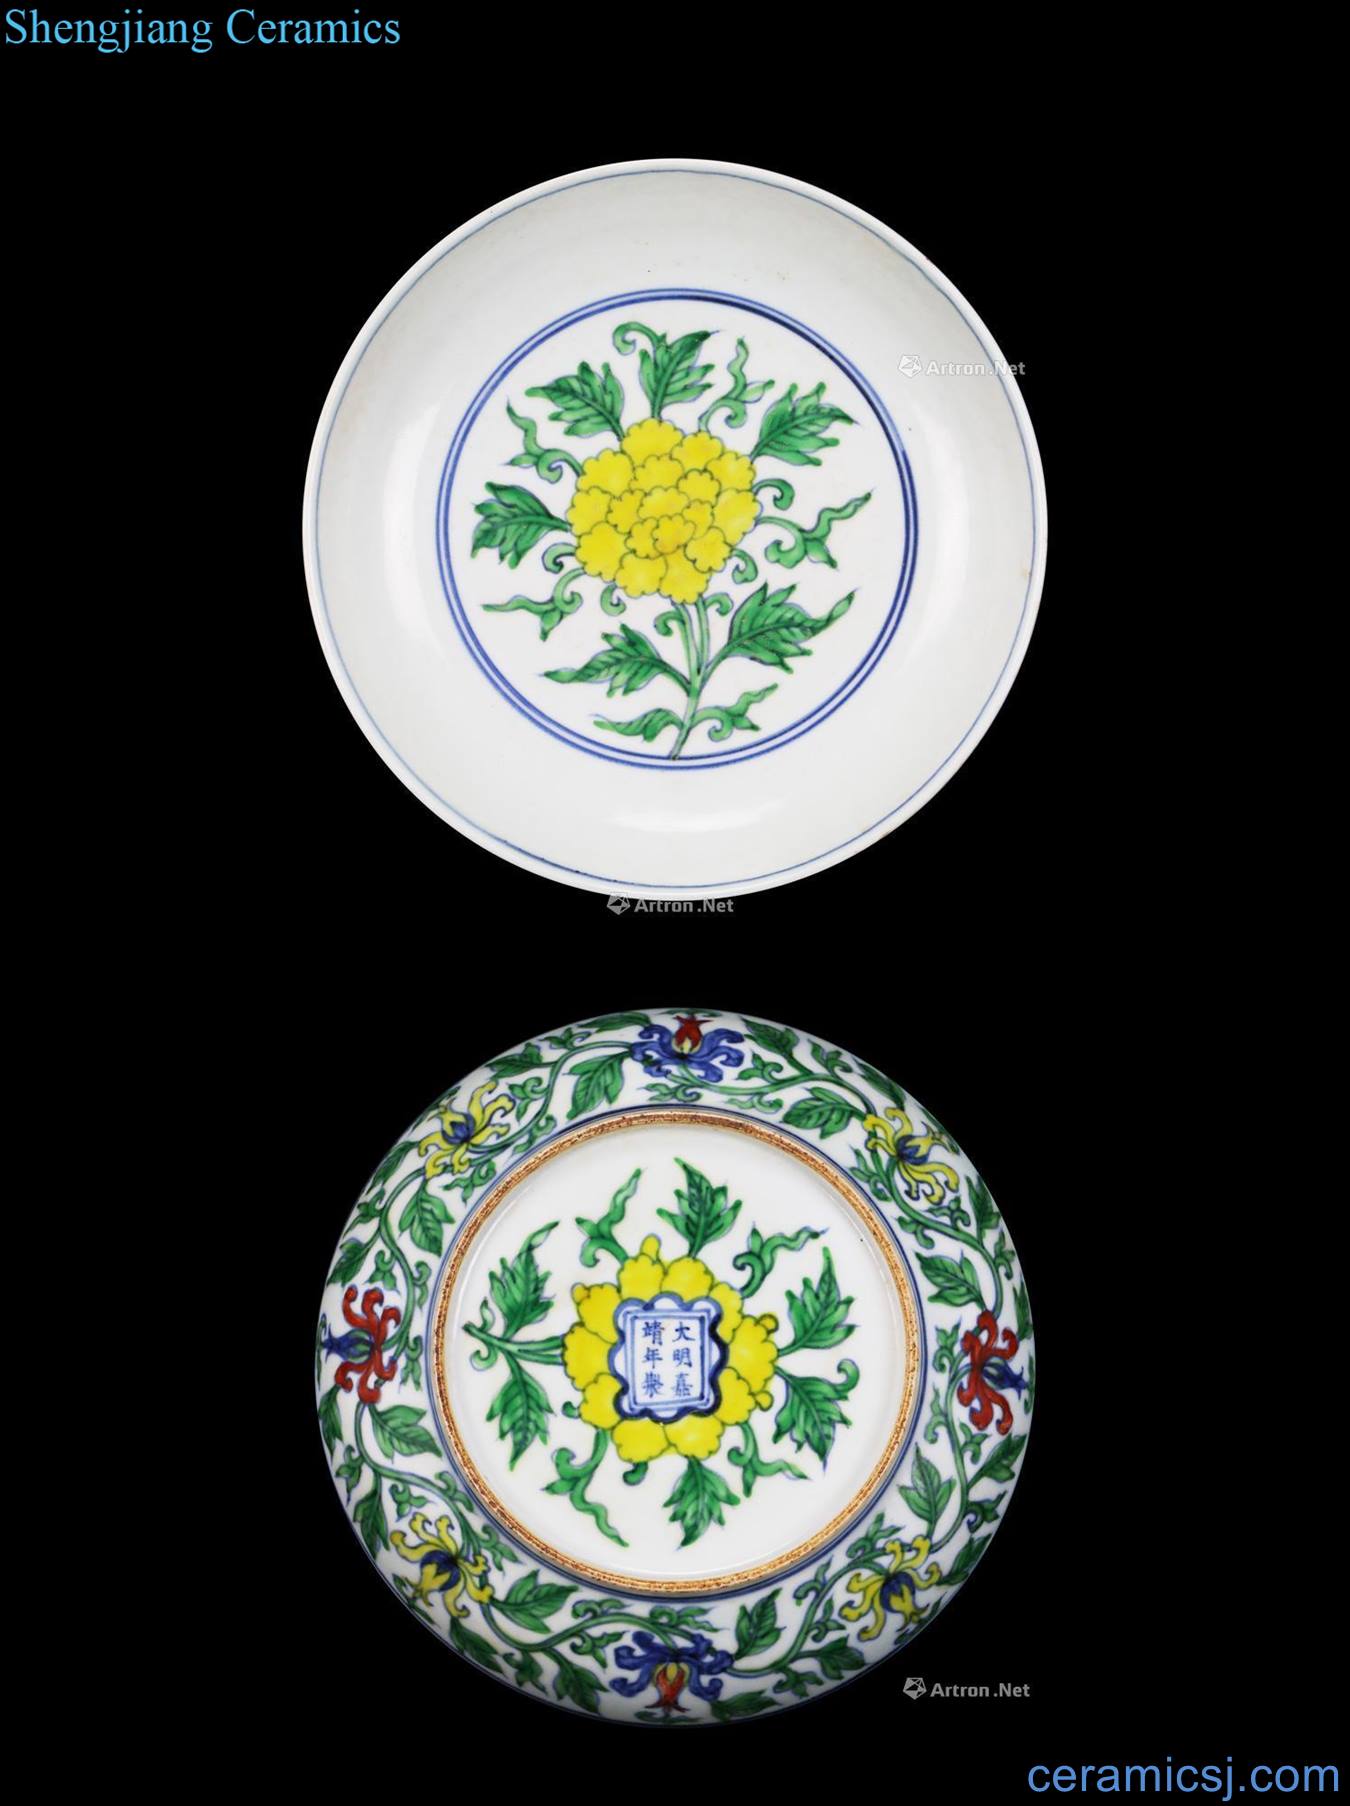 Ming Dou colors branch lotus flower plate (a)